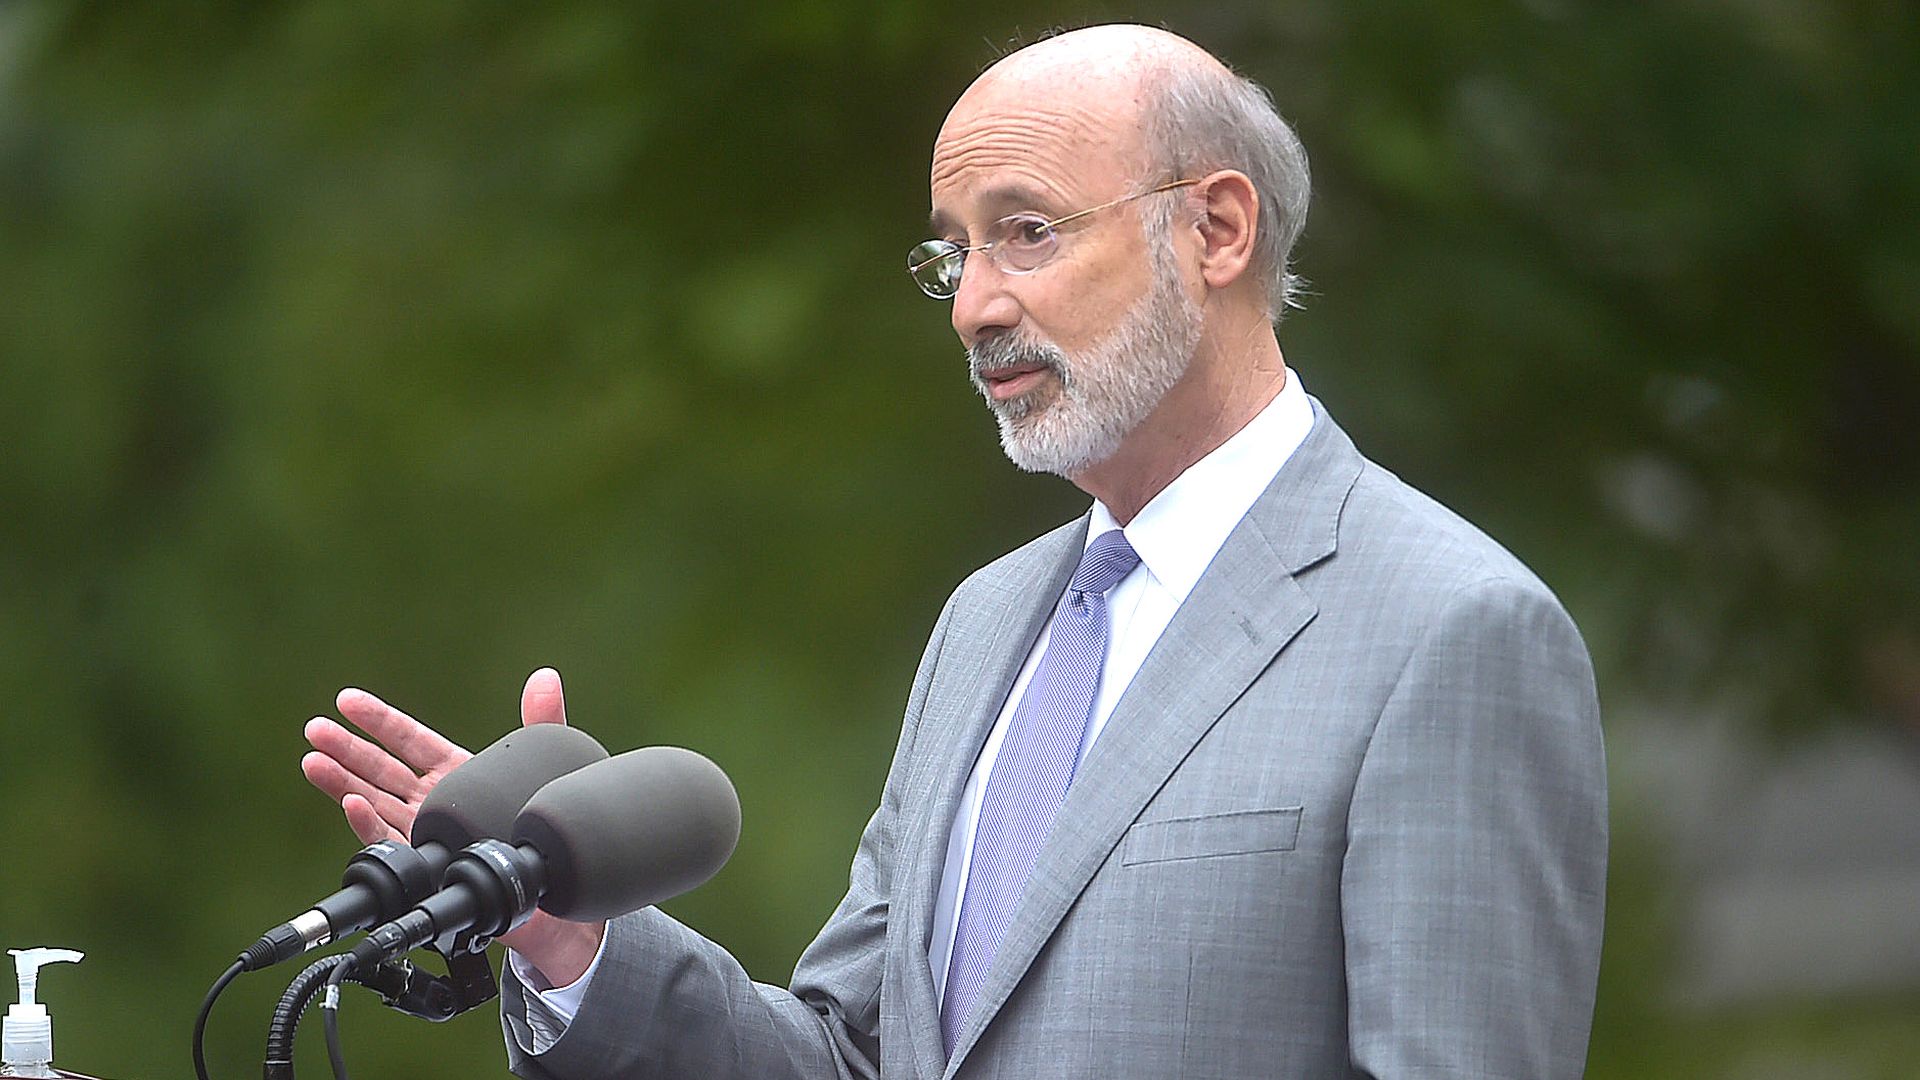 Tom Wolf stands in front of a microphone at a podium